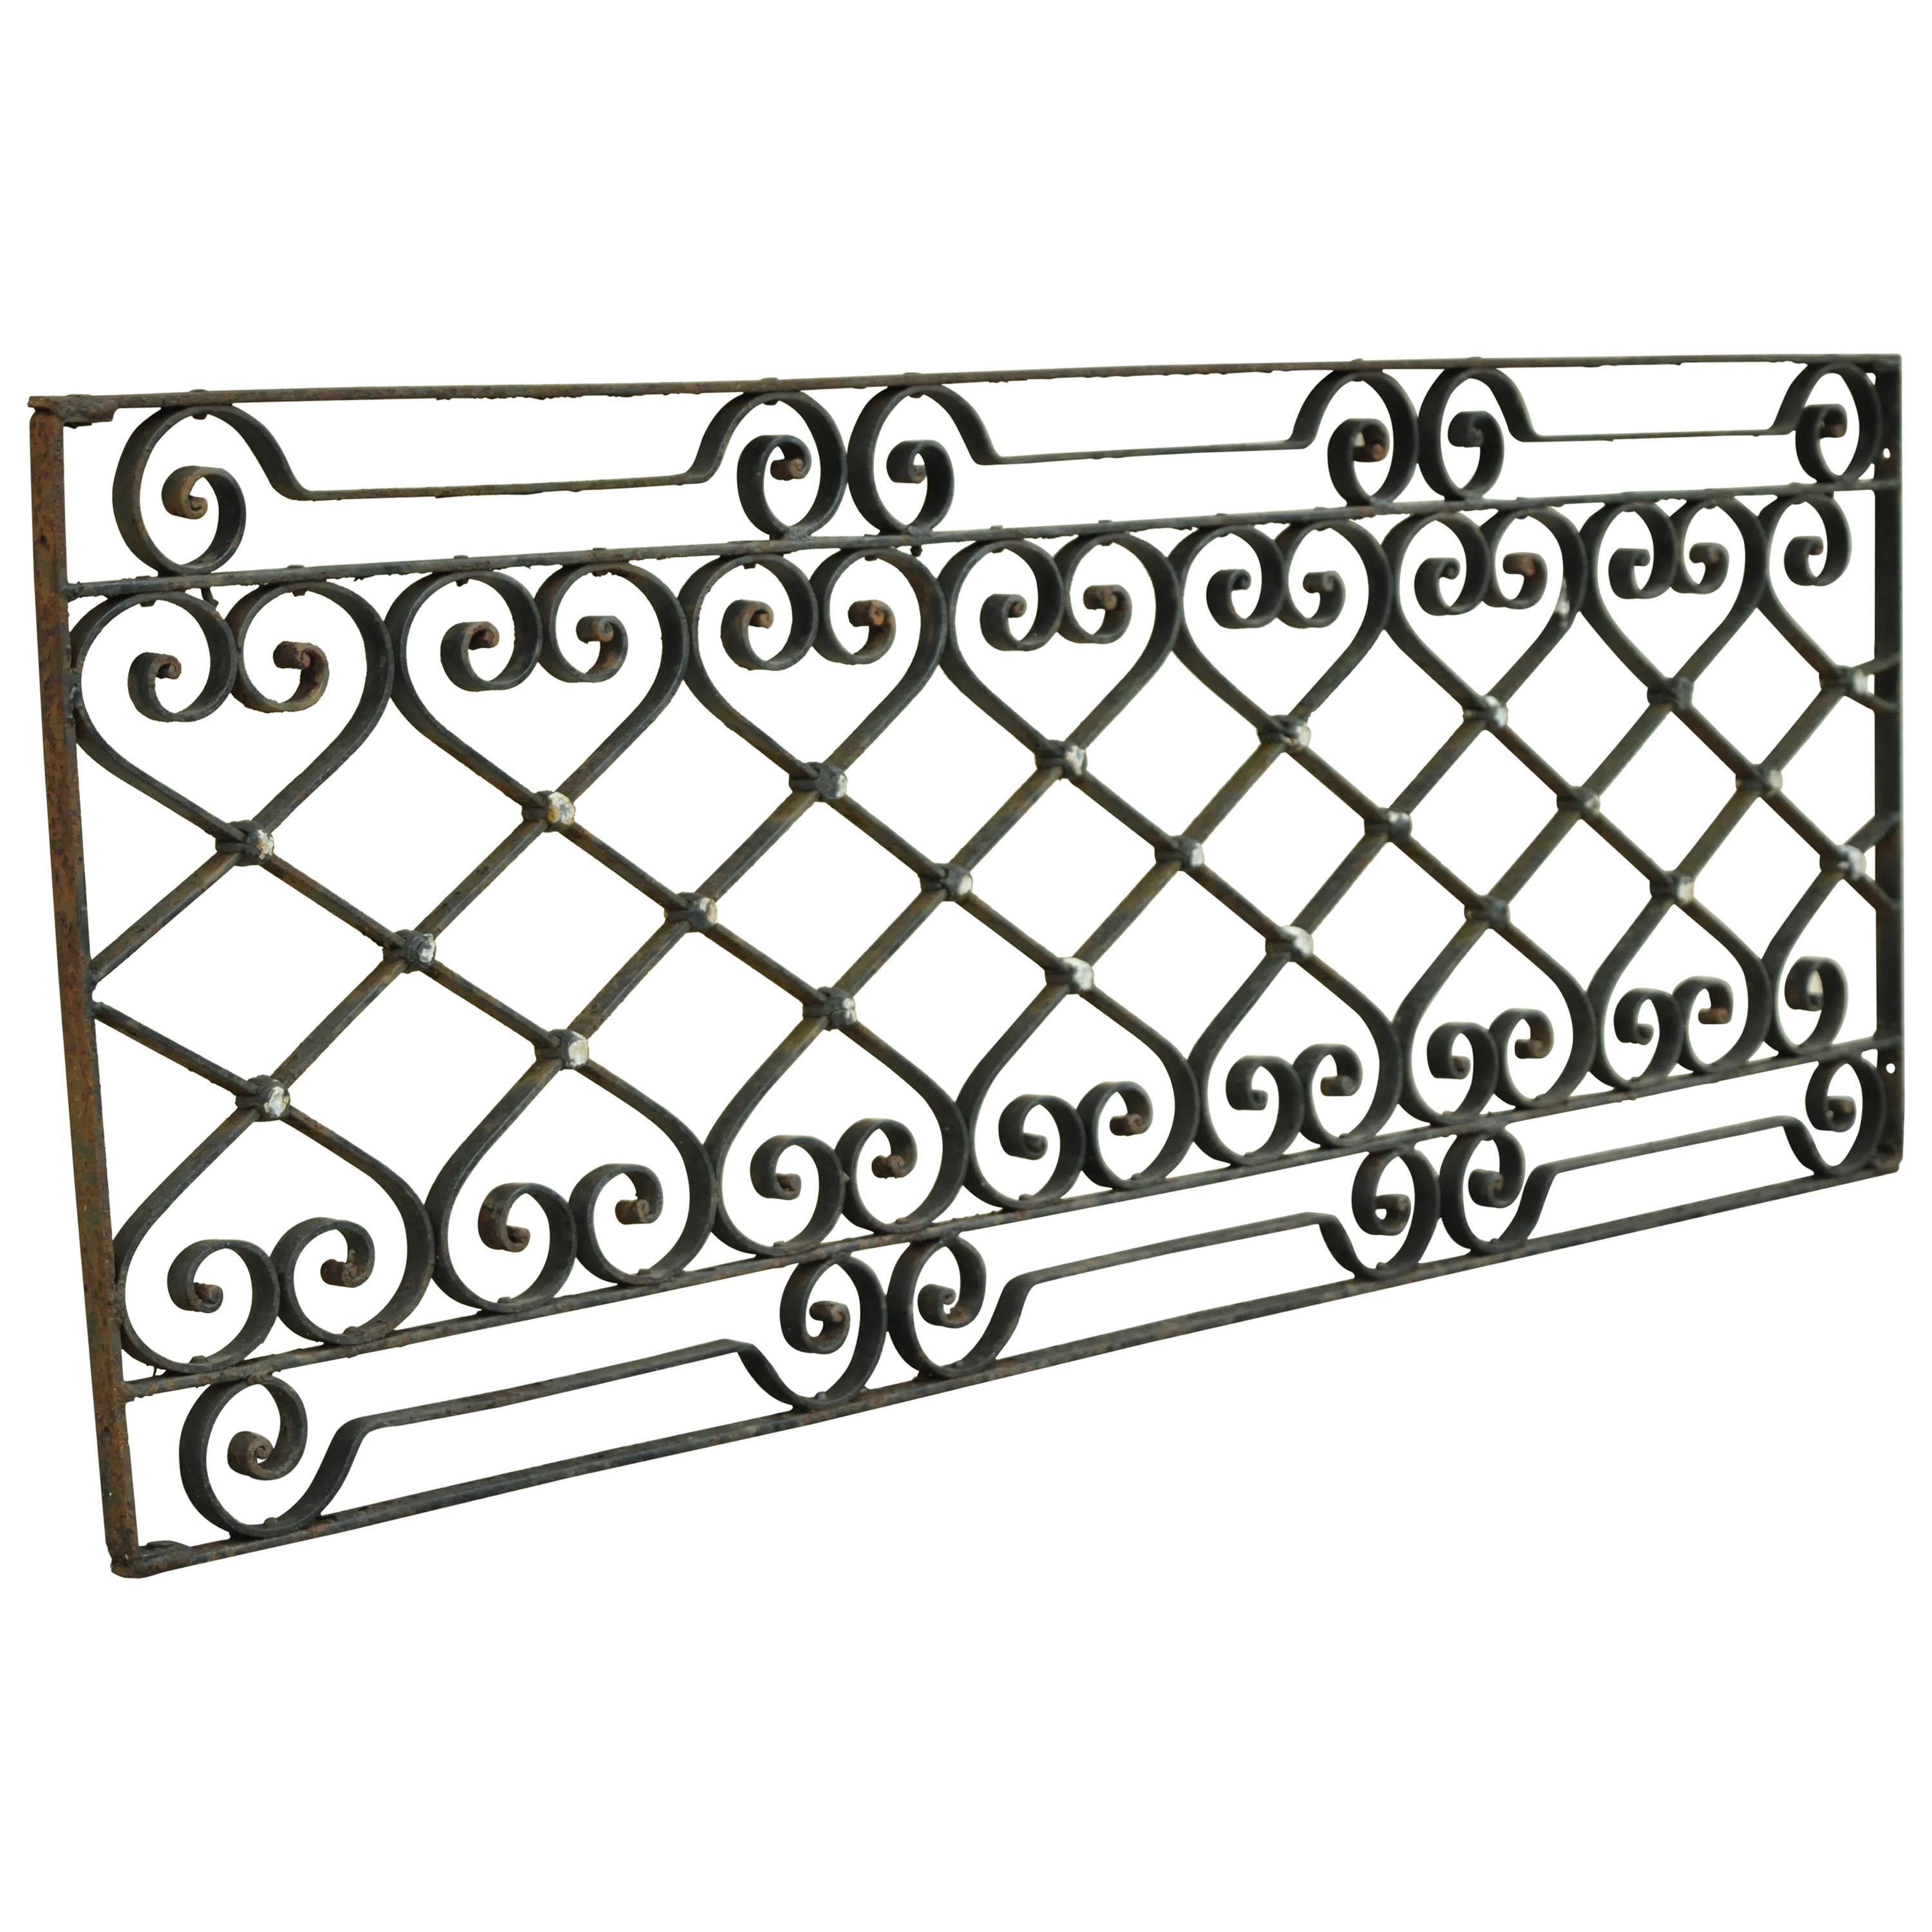 Antique Art Nouveau French Style Wrought Iron Scrolling Scrollwork Gate